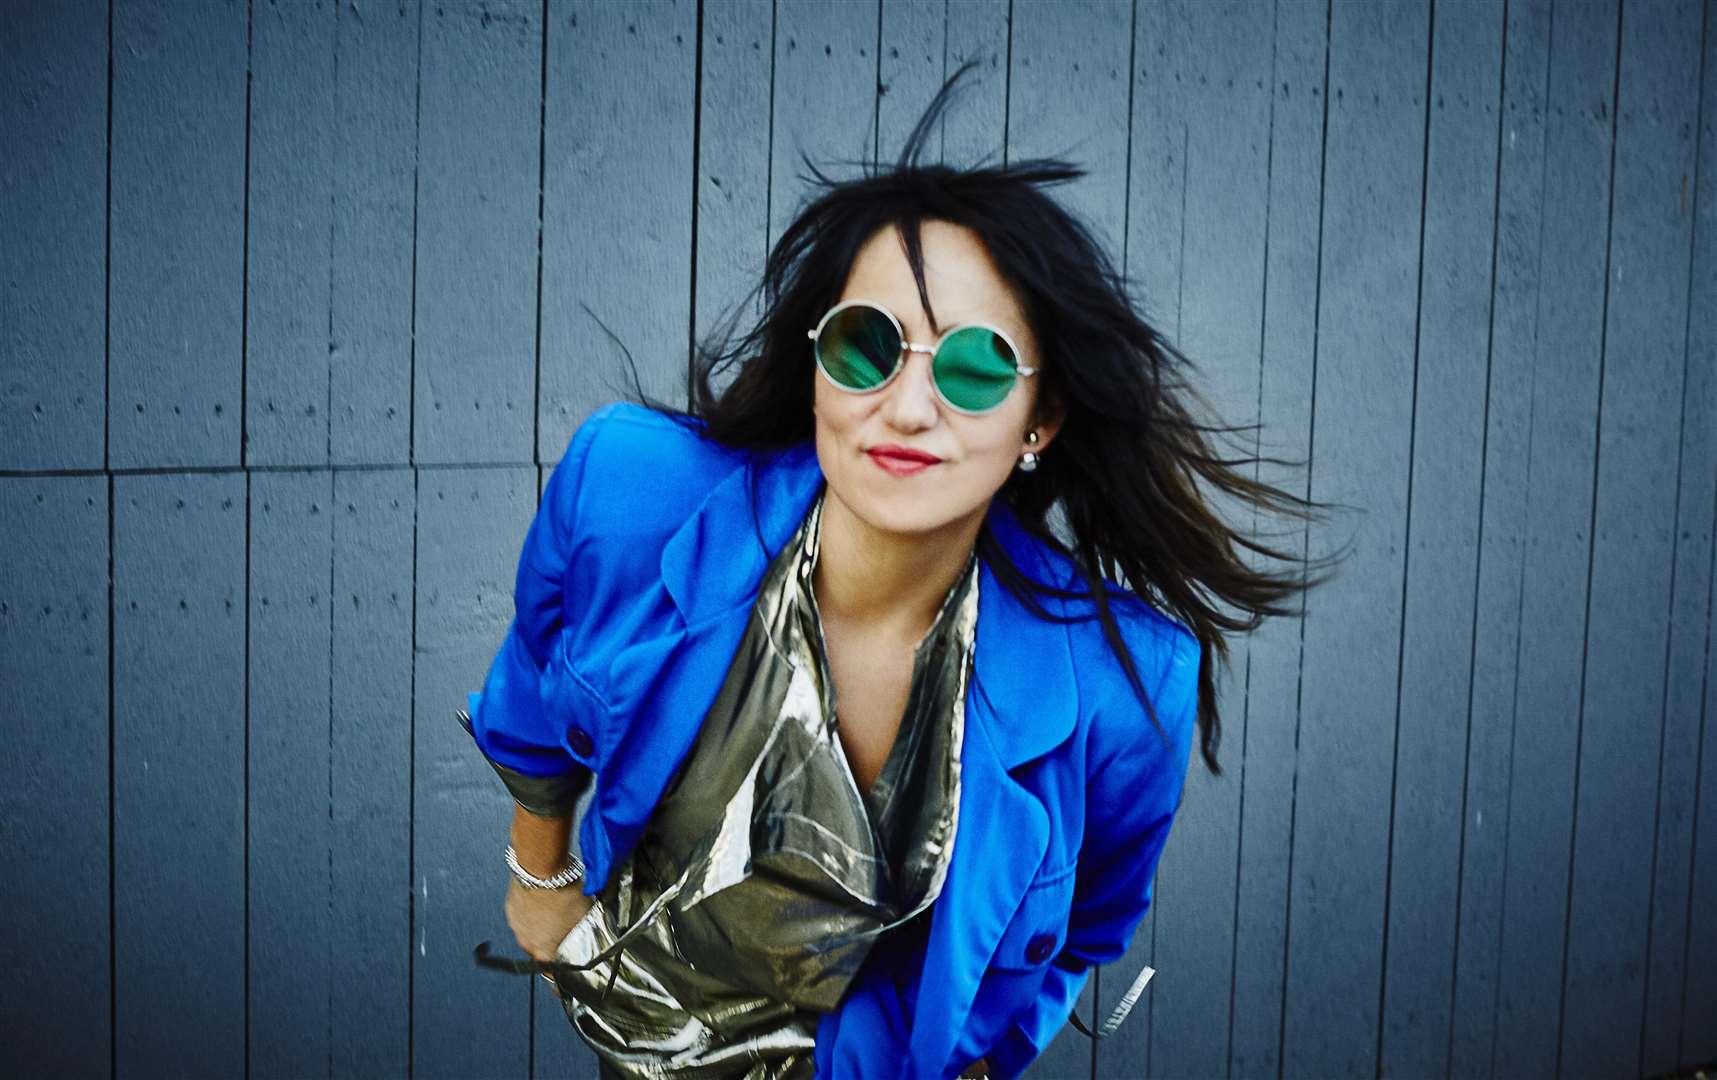 KT Tunstall will play the Kent Event Centre